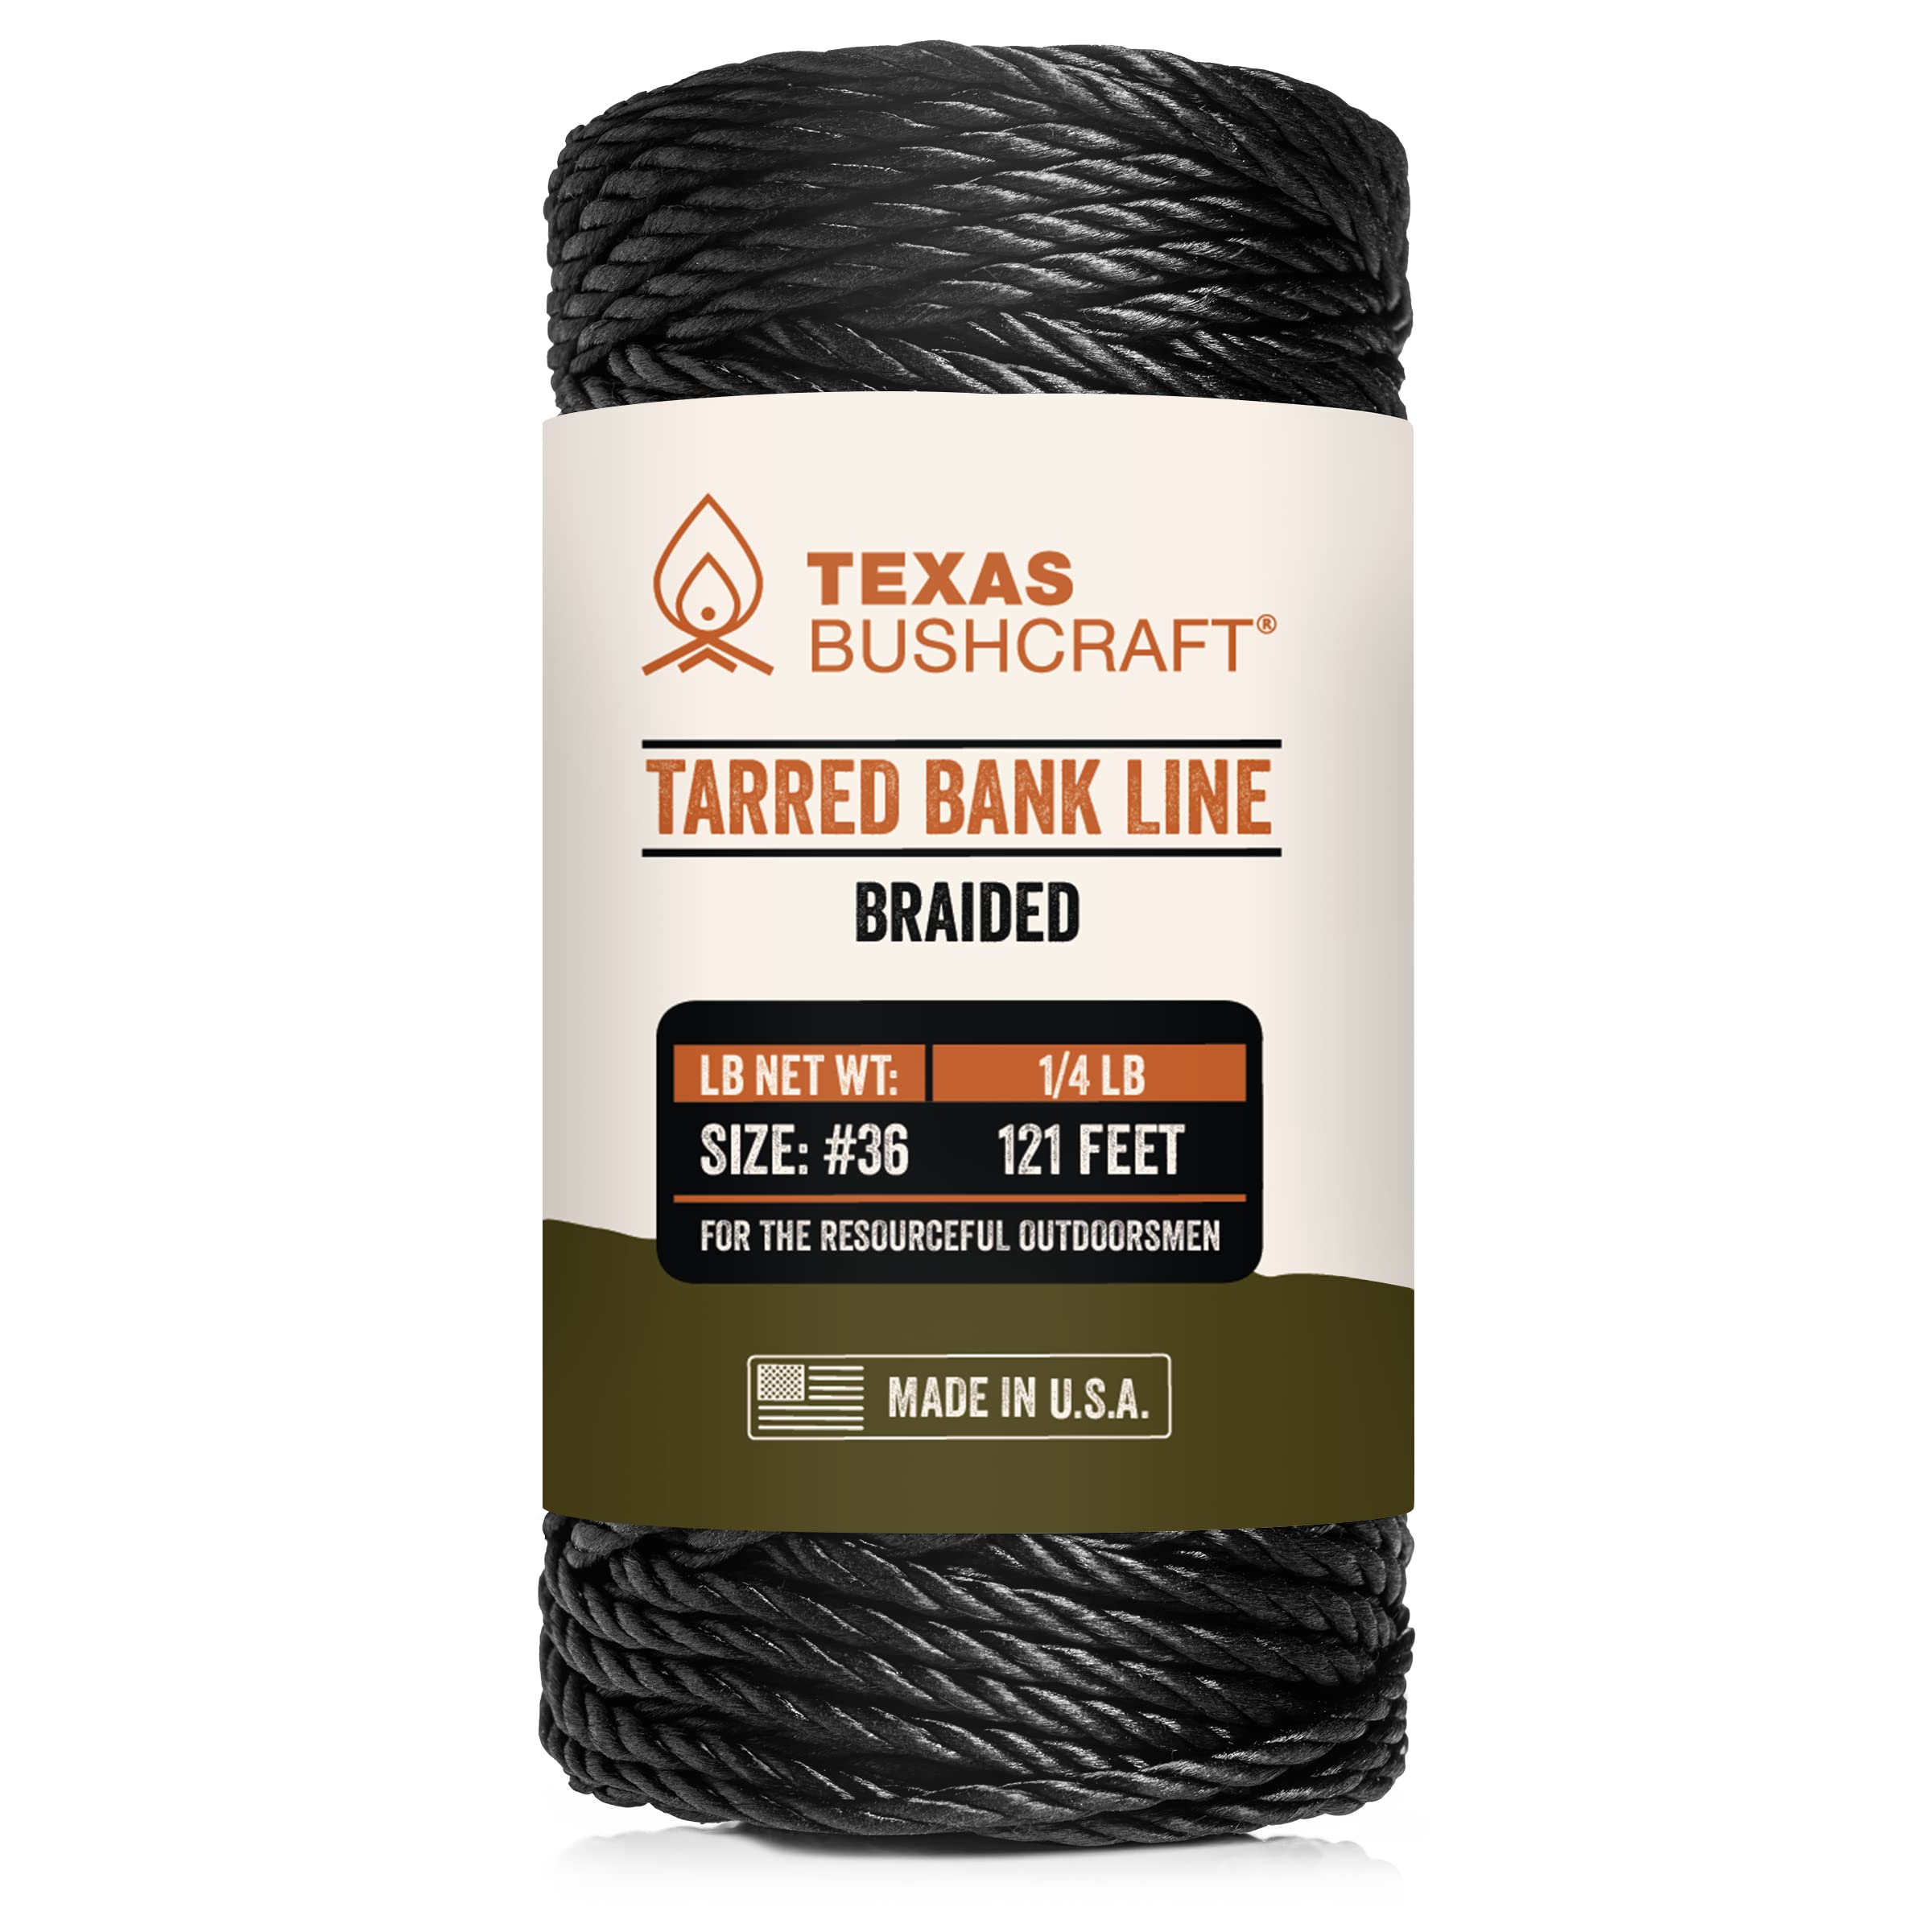 Texas Bushcraft Tarred Bank Line Twine - #36 Black Nylon String for  Fishing, Camping and Outdoor Survival Strong, Weather Resistant Bankline  Cordage for Trotline 1/4 lb - #36 (121 ft) Braided